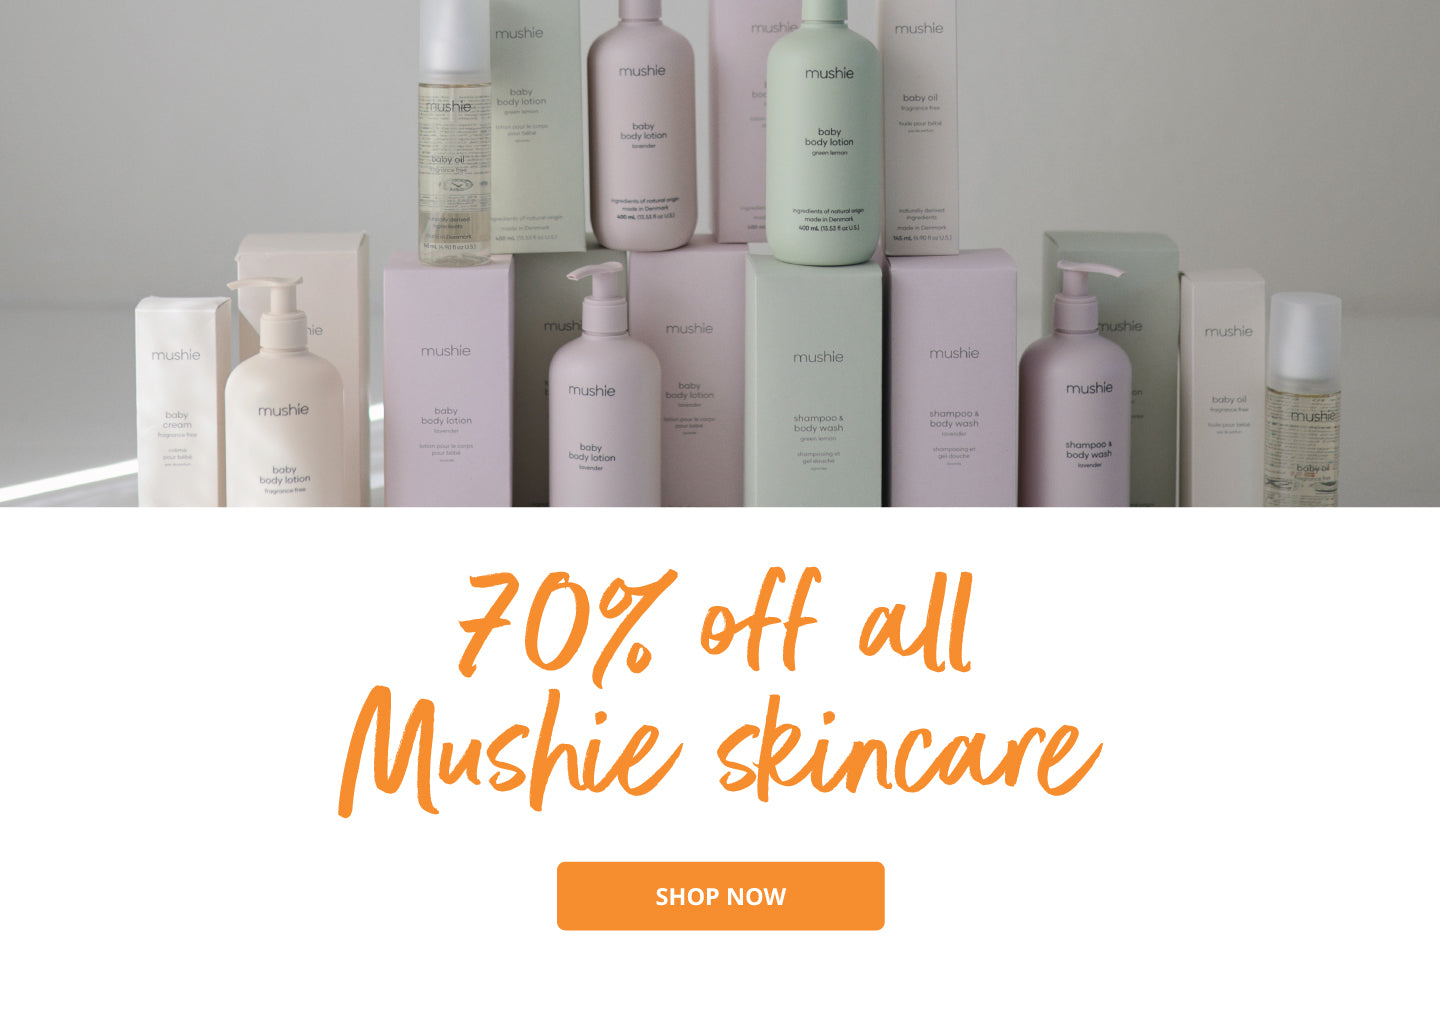 70% OFF all Mushie skincare